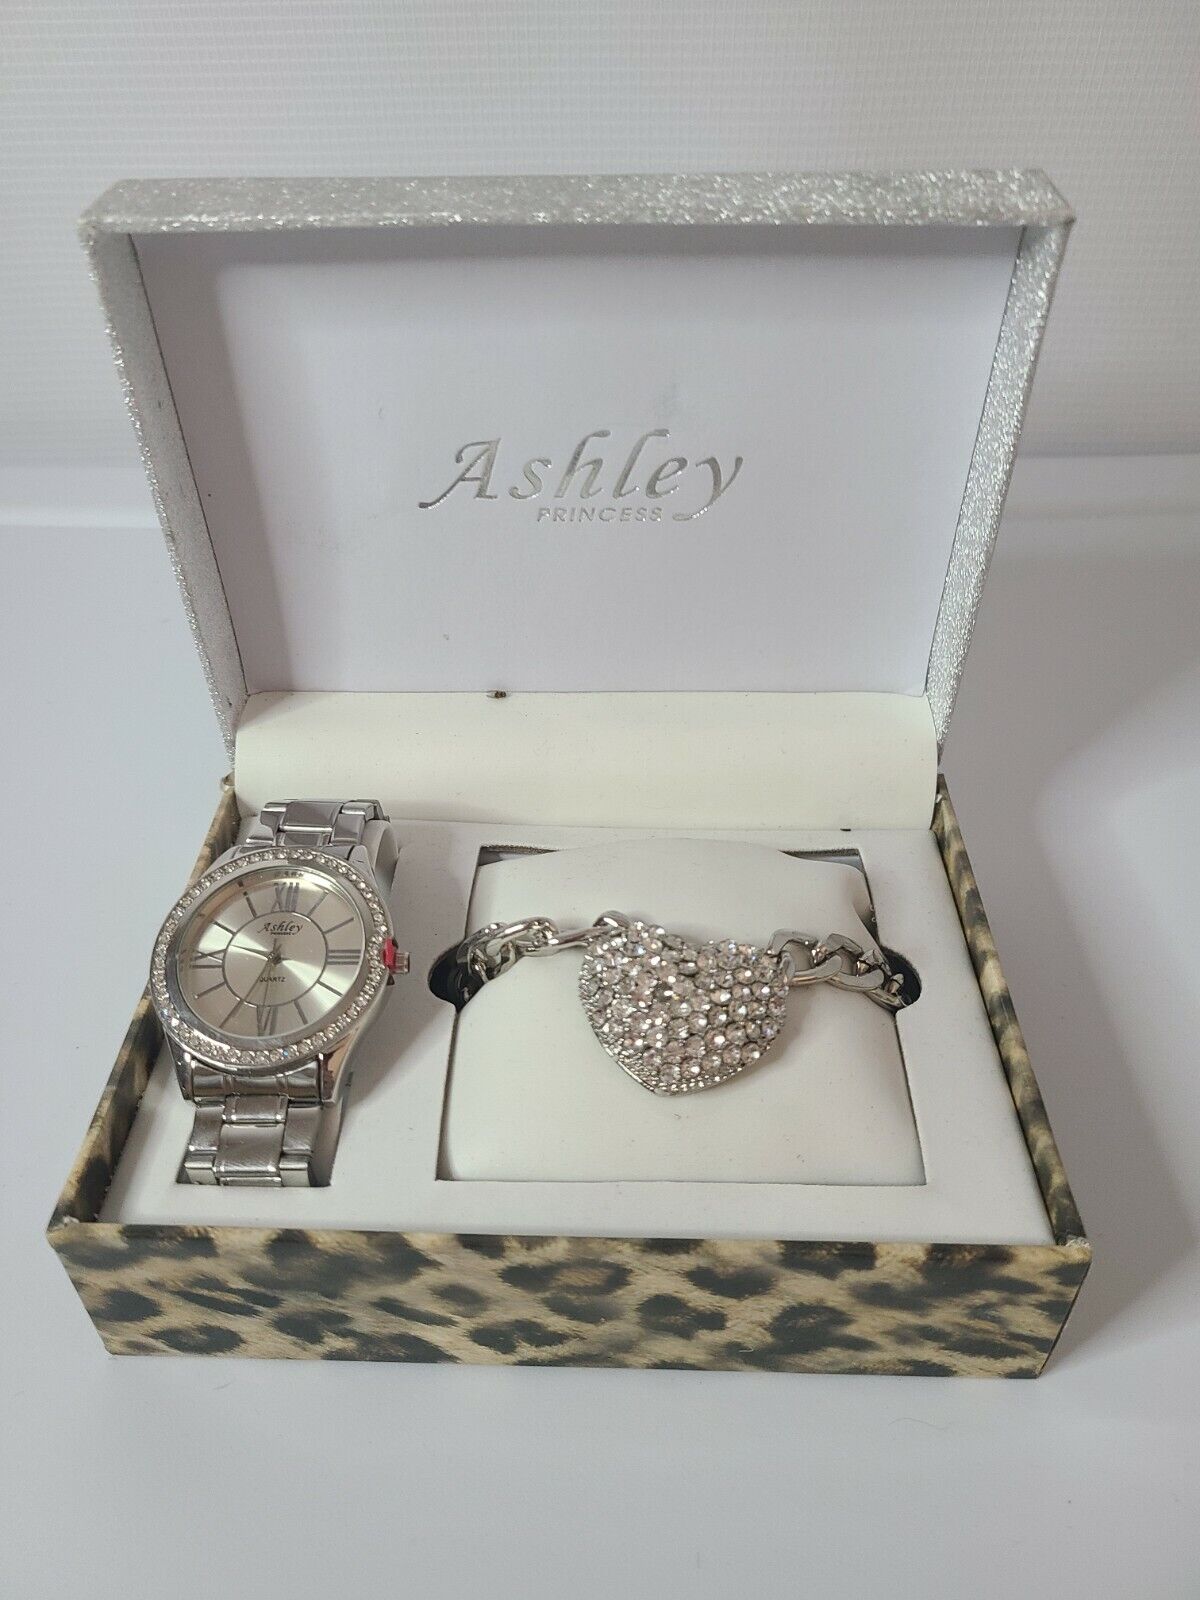 Best of Ashley princess watches